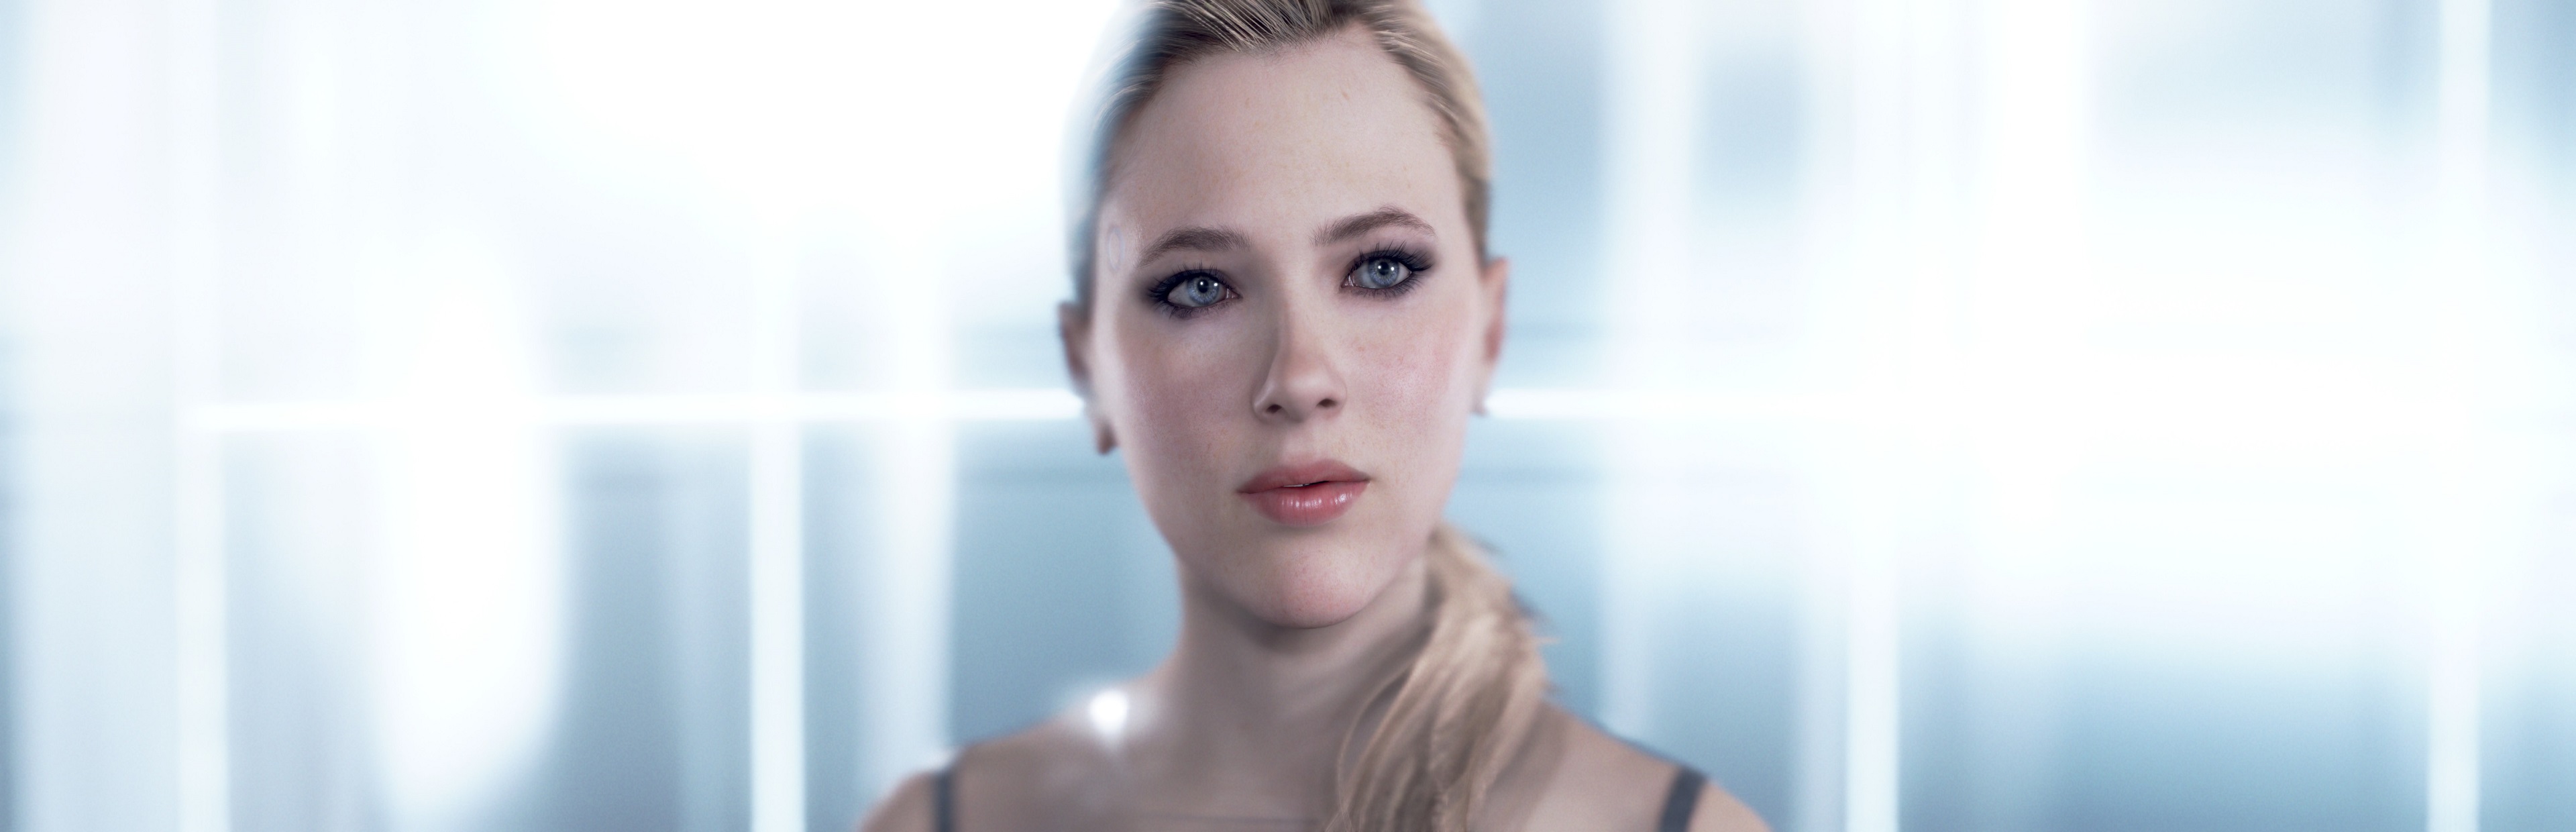 Detroit: Become Human - SteamGridDB